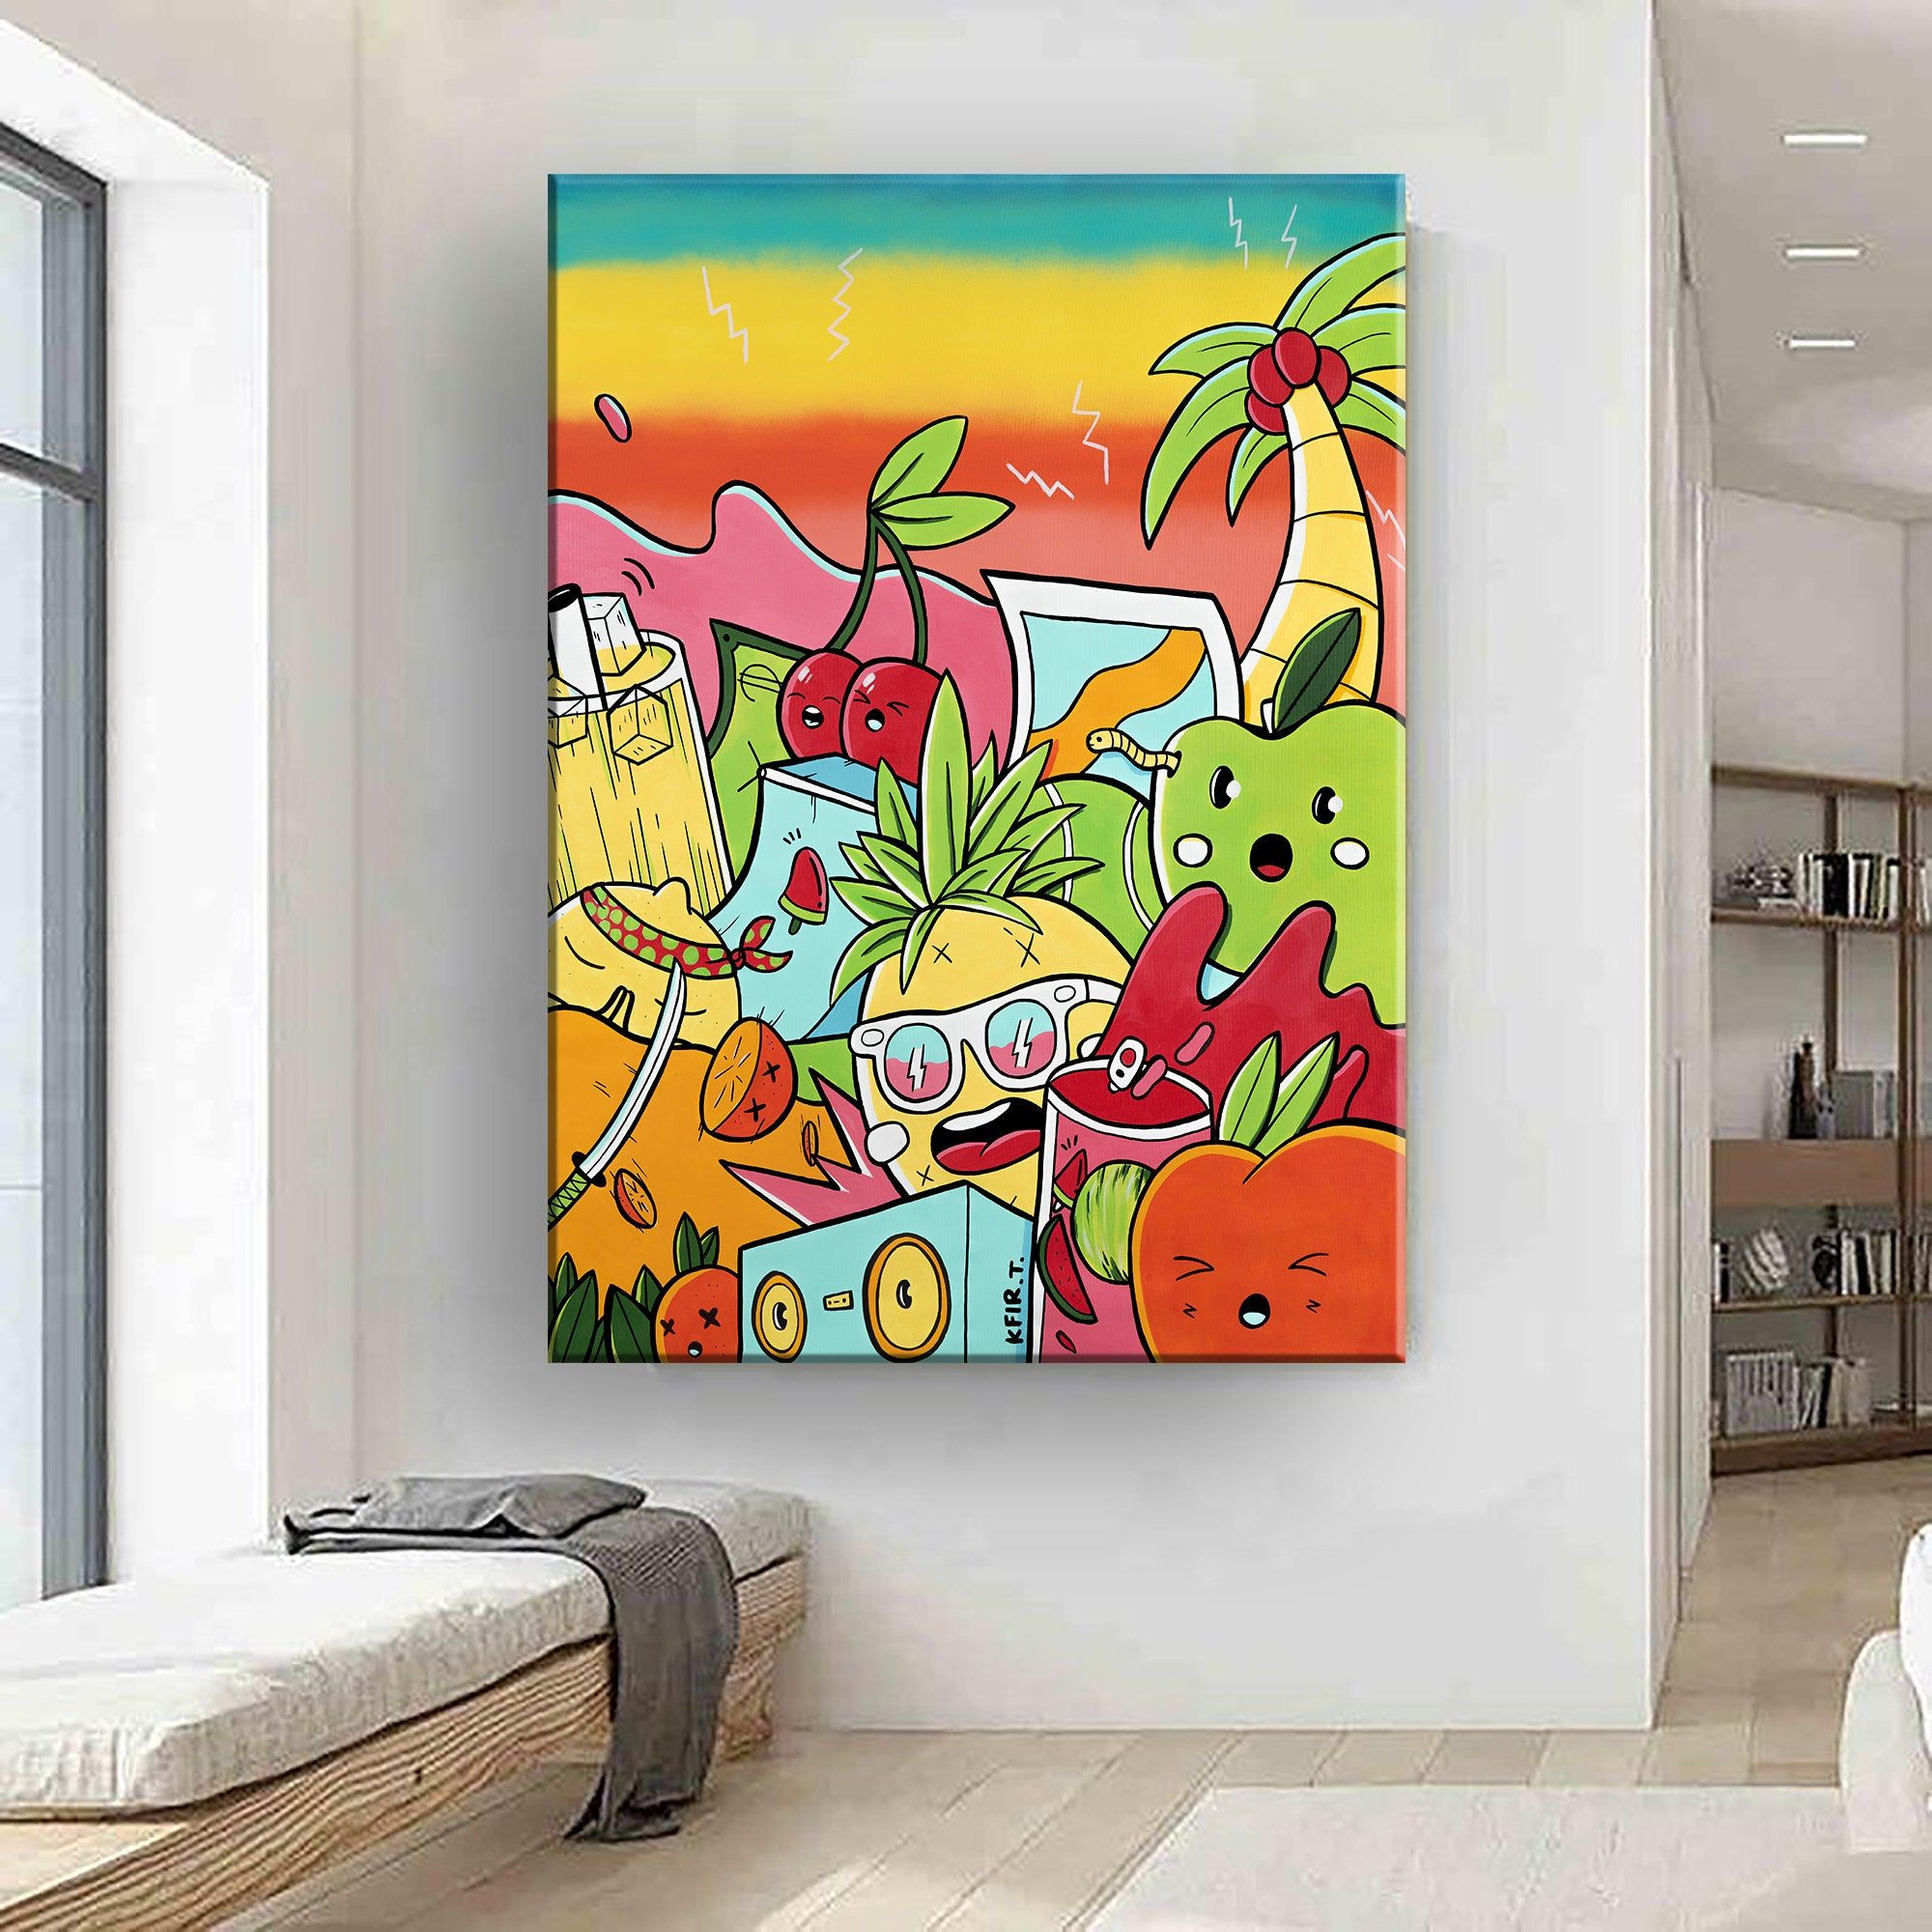 Extra Large Graffiti Style Wall Art Vertical Colorful Street – Etsy Pertaining To 2017 Graffiti Style Wall Art (View 1 of 20)